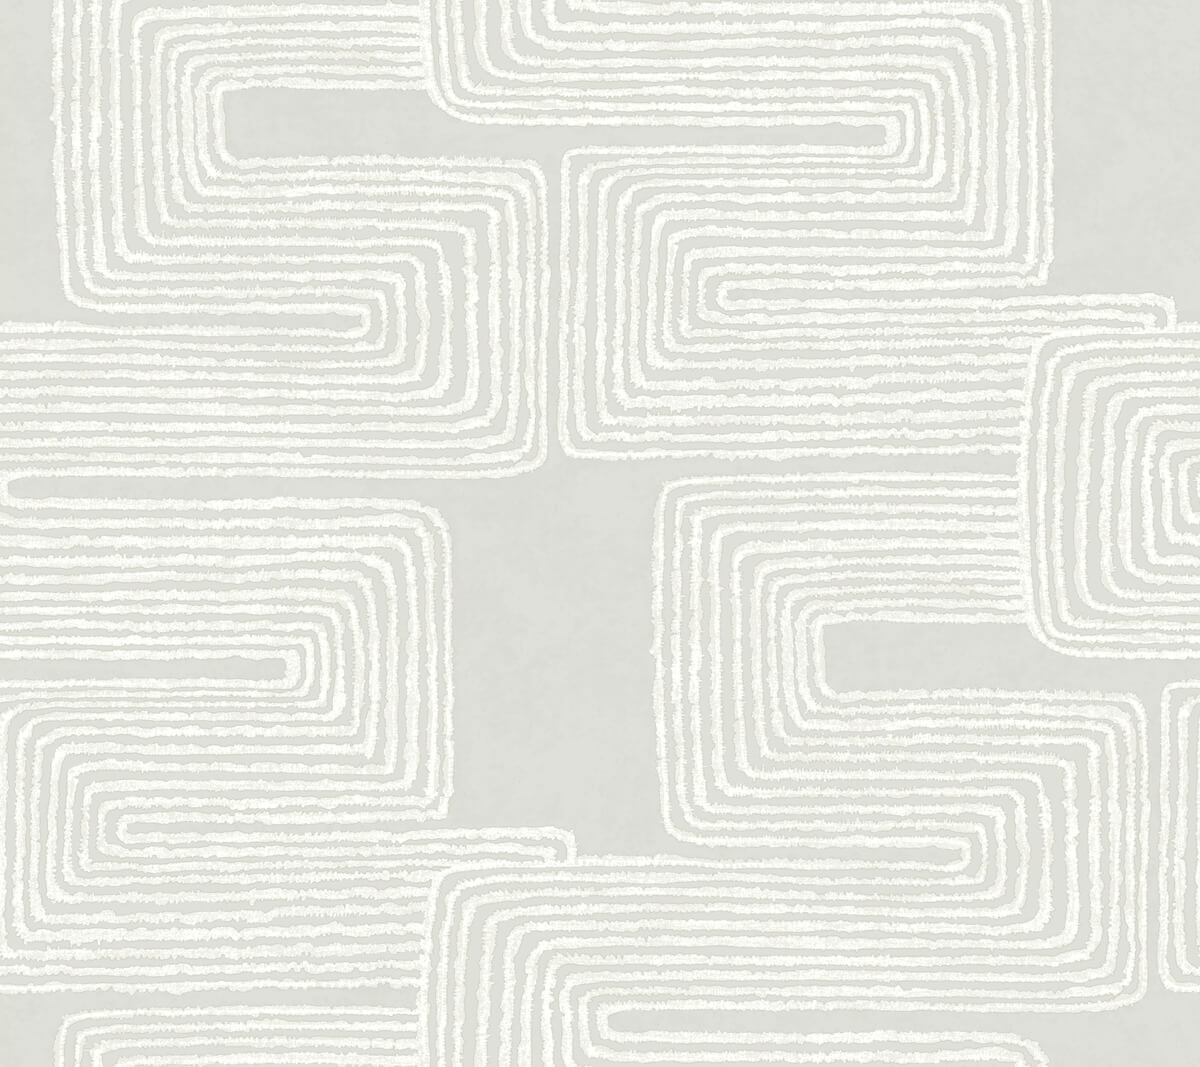 Artistic Abstracts Zulu Thread Wallpaper - White